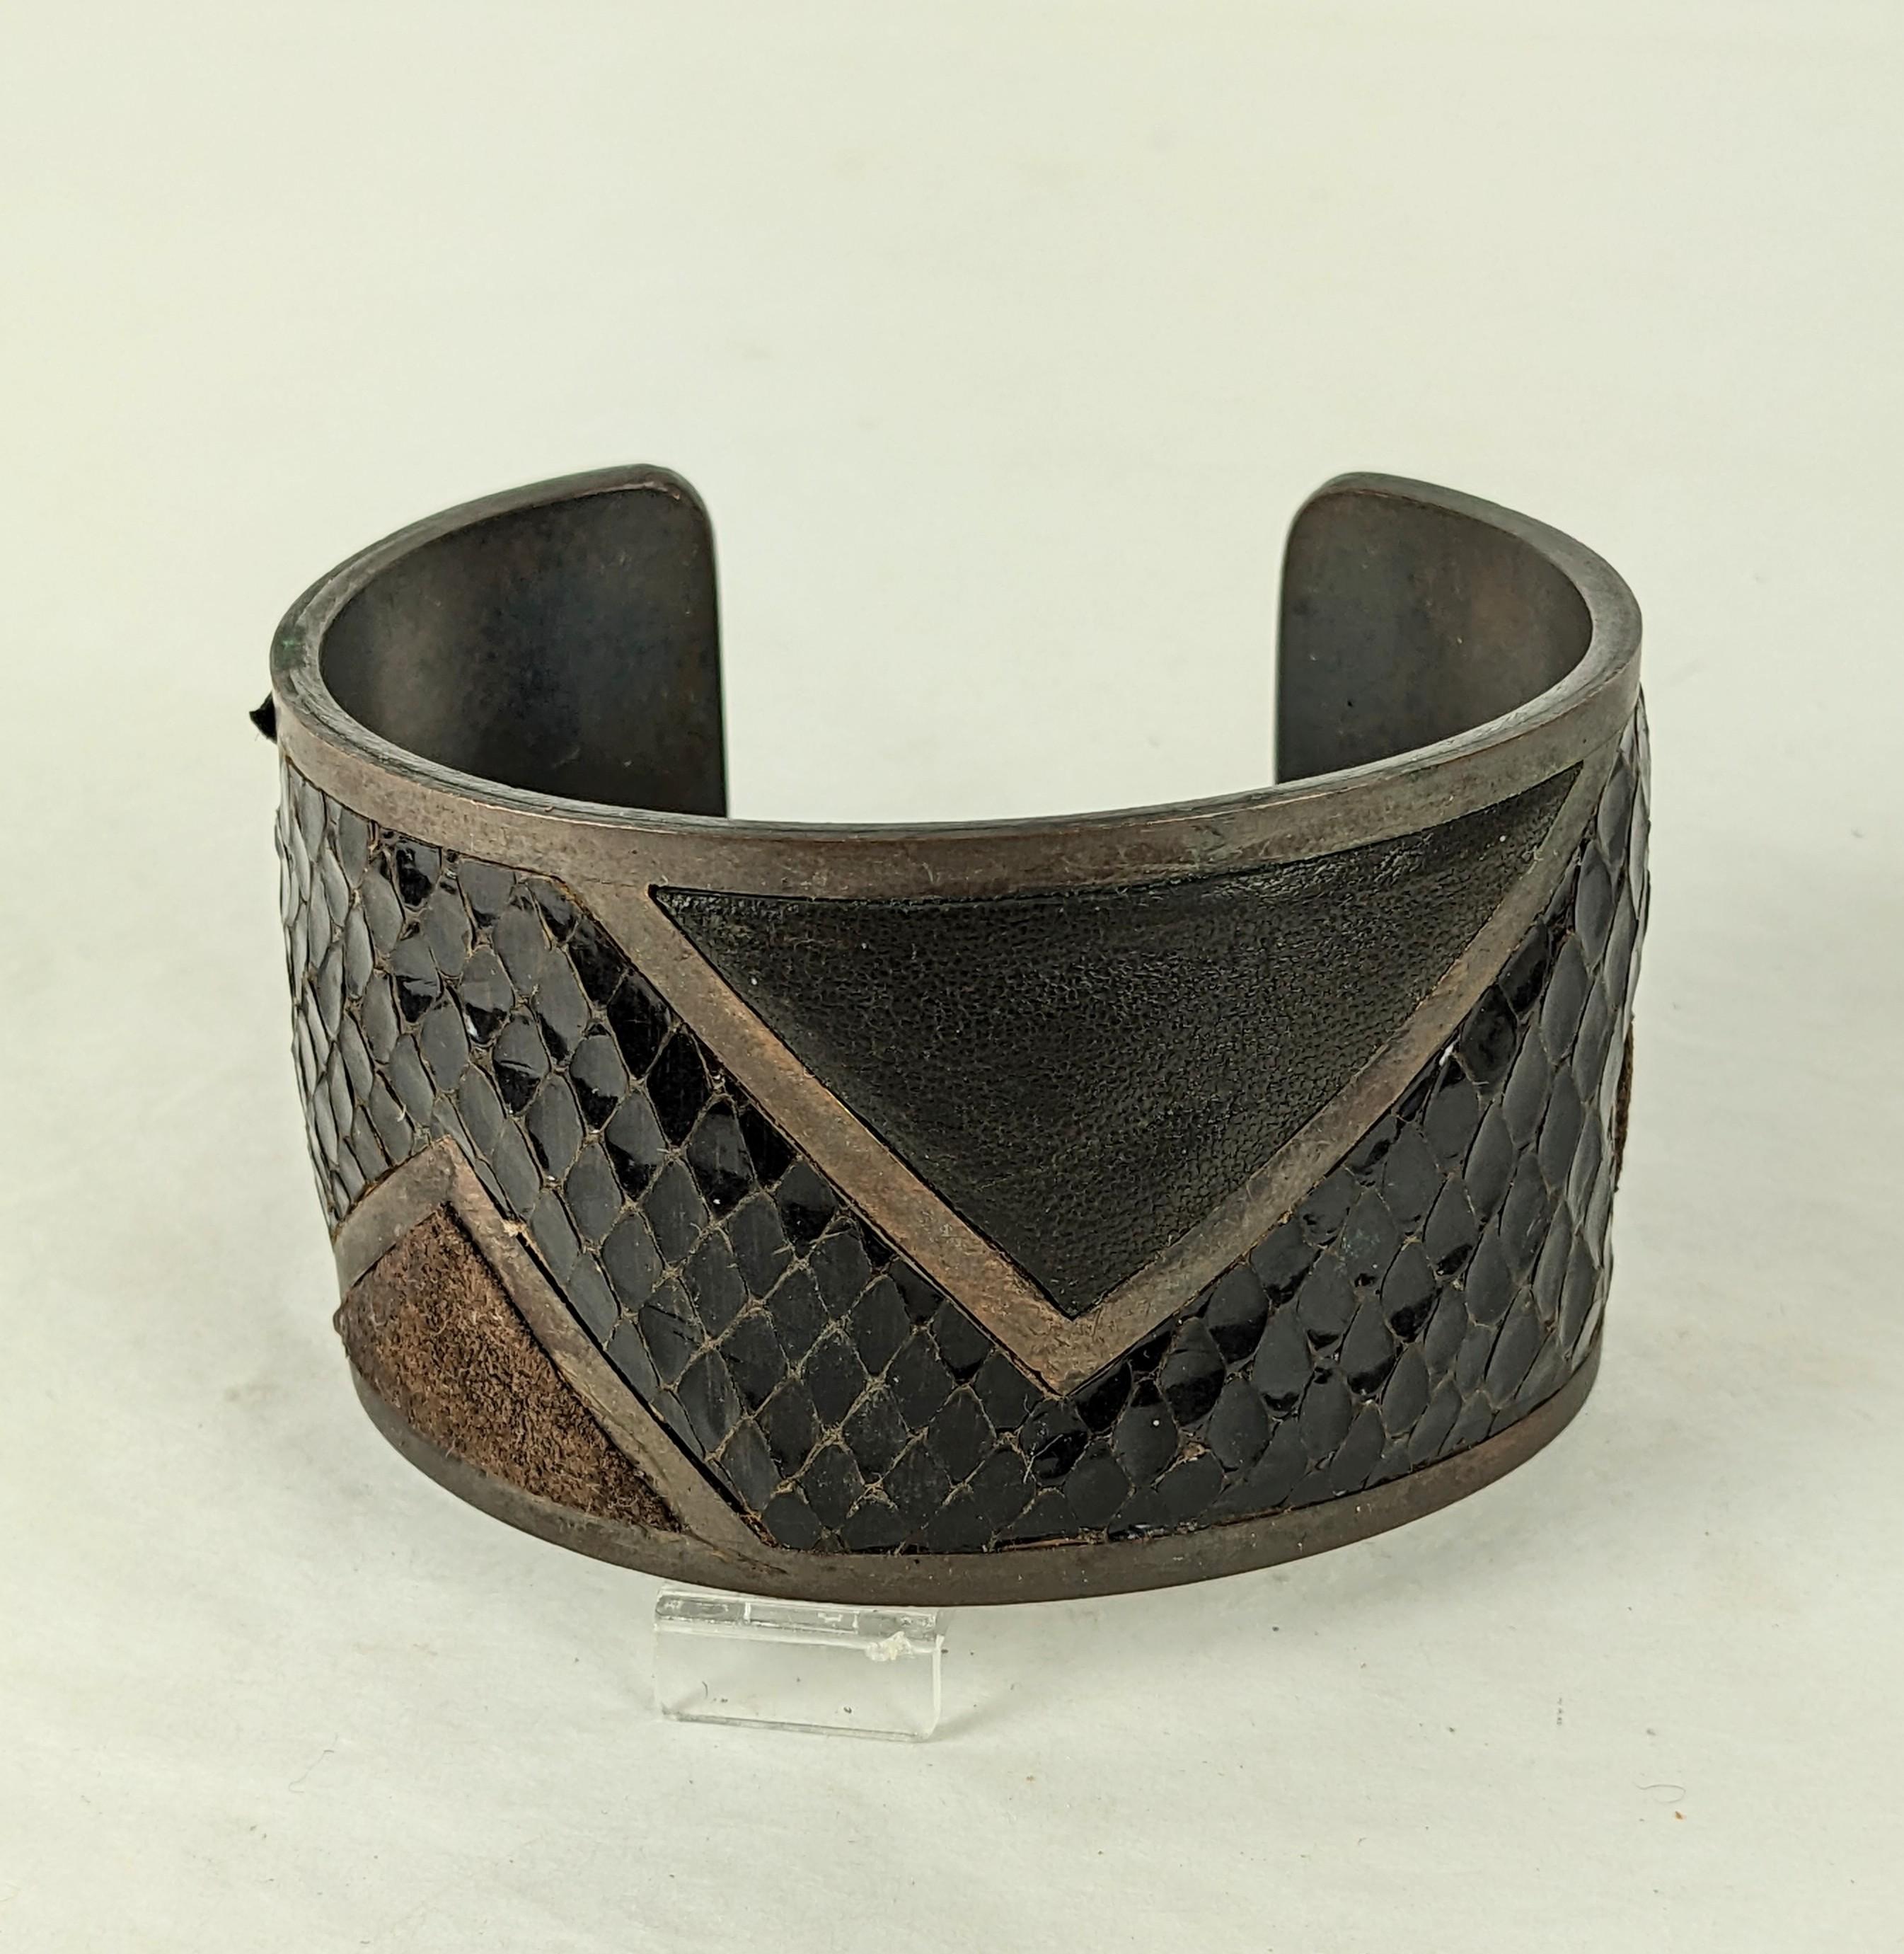 Super Chic Yves Saint Laurent Haute Couture 1980 Cuff Bracelet. Art Deco styling in darkened copper over bronze with padded snakeskin, suede and calf leather. 3 different textures beautifully underlaid with padding so each is dimensional. Chic black